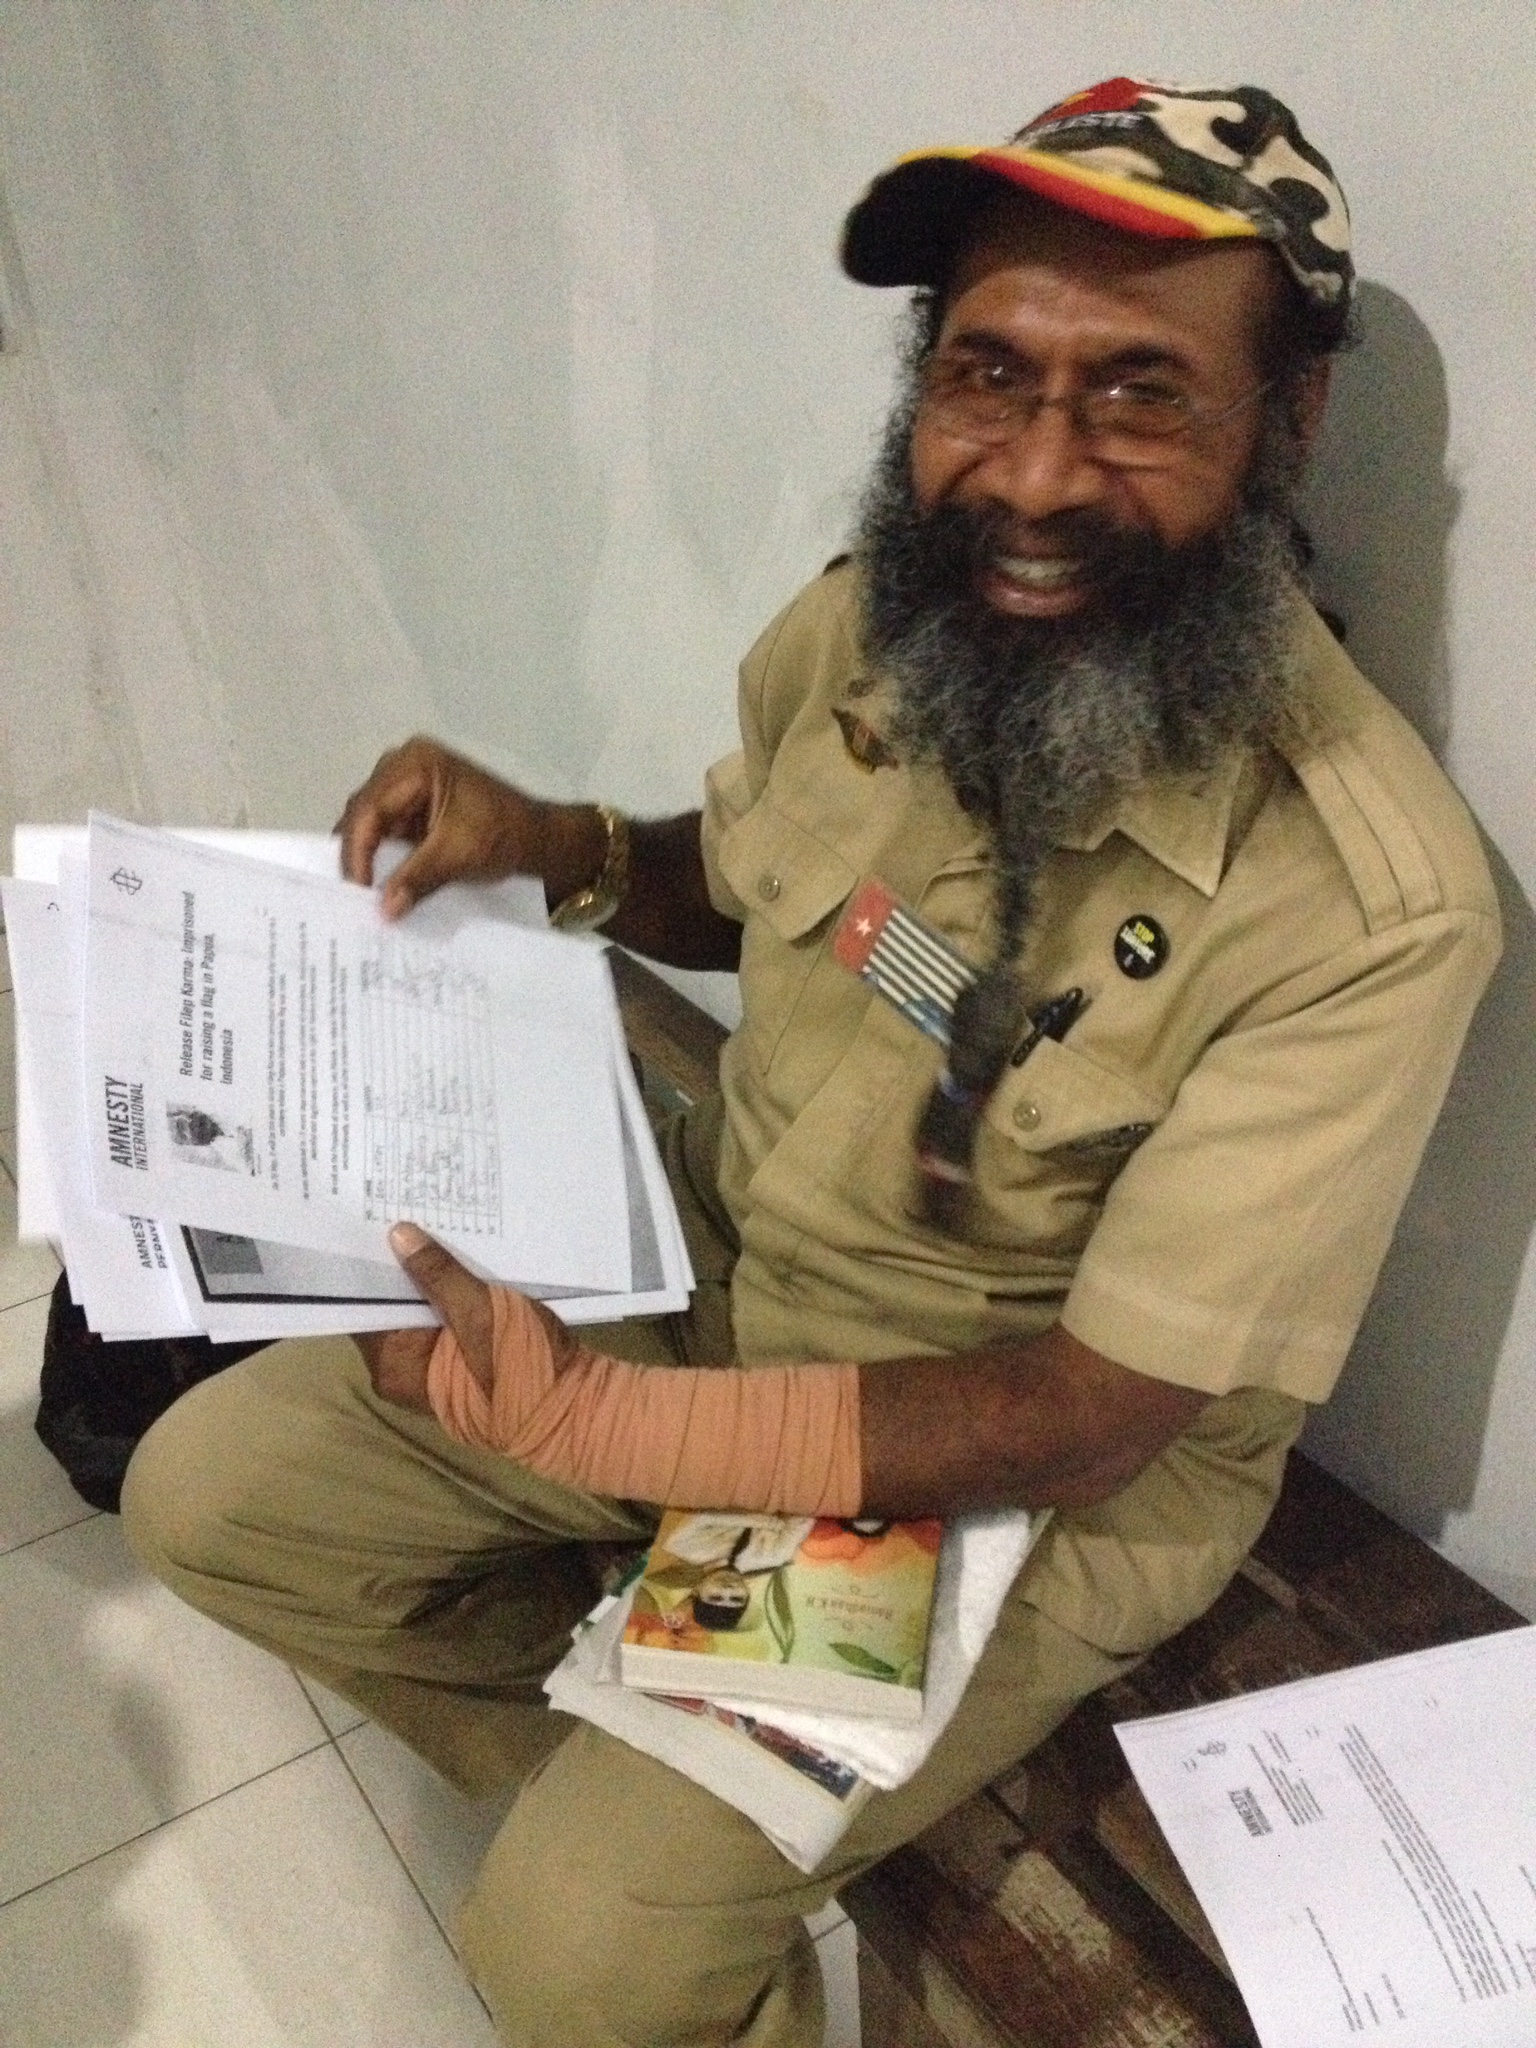 Filep Karma with petitions signed by Amnesty International activists calling for his release. He is smiling. Filep Karma is serving 15 years in prison for raising a flag. A prominent advocate for the rights of Indonesia's Papuan population, Filep Karma was arrested for taking part in a peaceful ceremony on December 1, 2004, which included the raising of the Morning Star flag, a Papuan symbol. Amnesty International considers Filep Karma to be a prisoner of conscience who has been imprisoned solely for the peaceful and legitimate exercise of his right to freedom of expression.